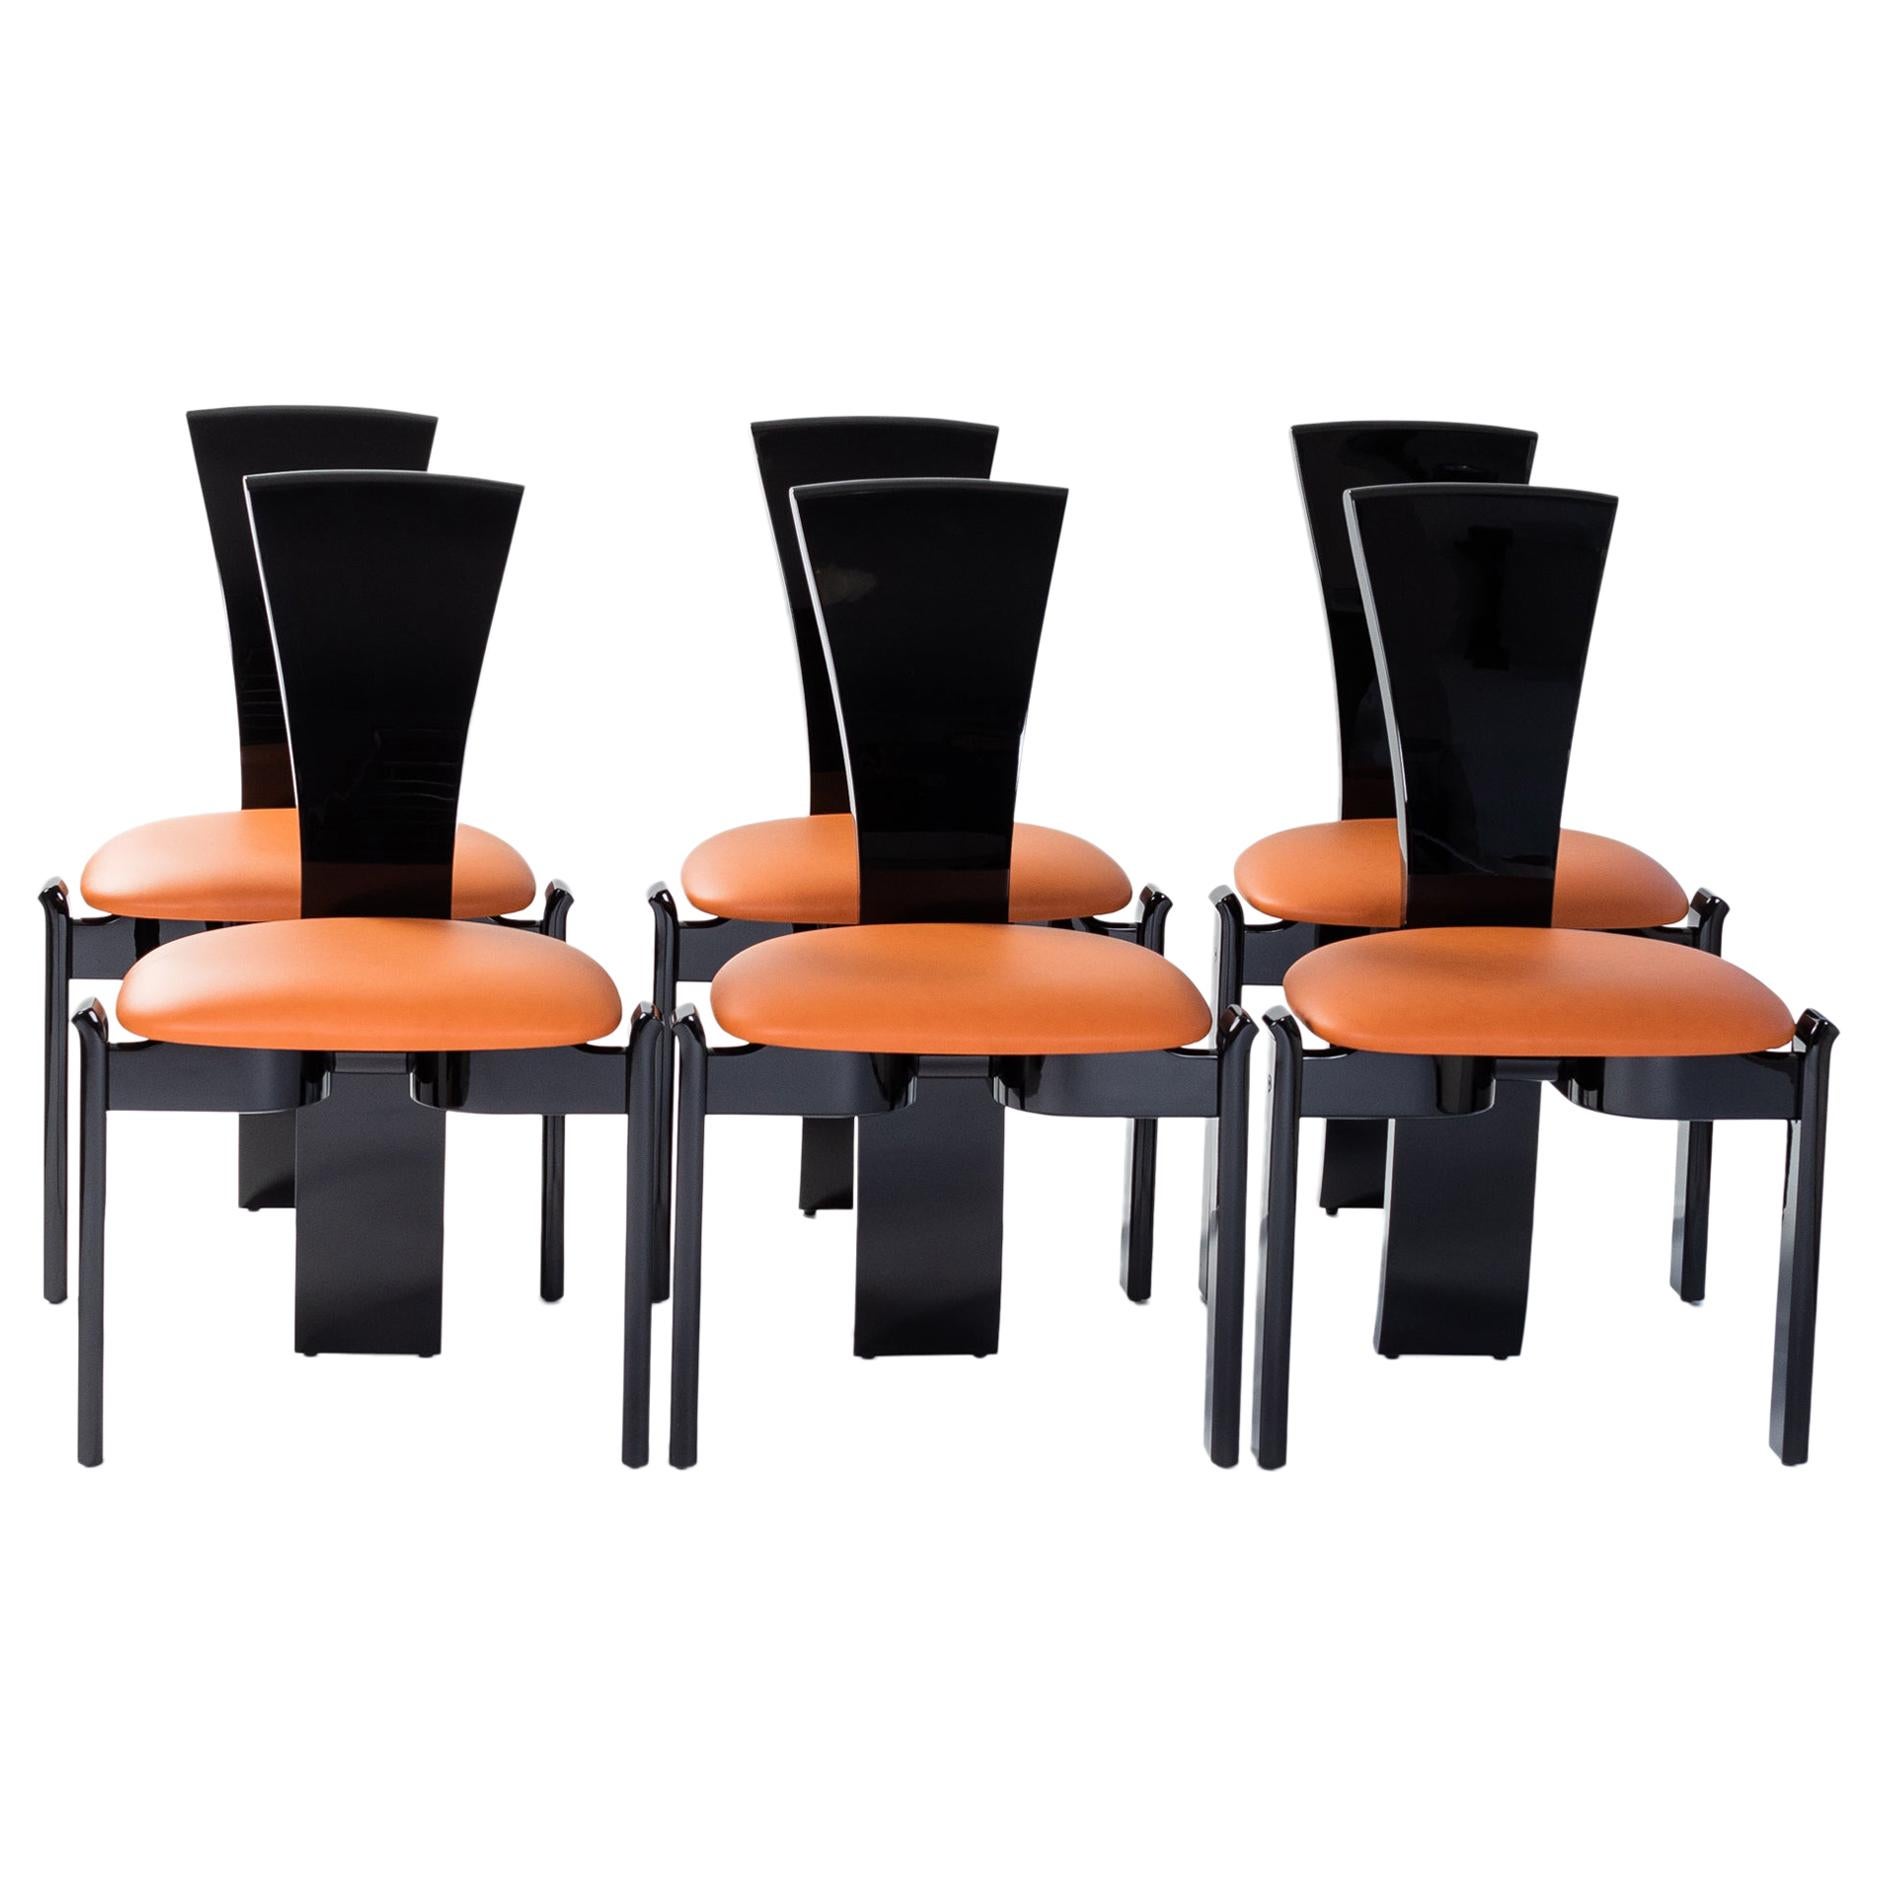 6 French Mid-Century Dining Room Chairs Black Lacquer Hermès Colored Leather